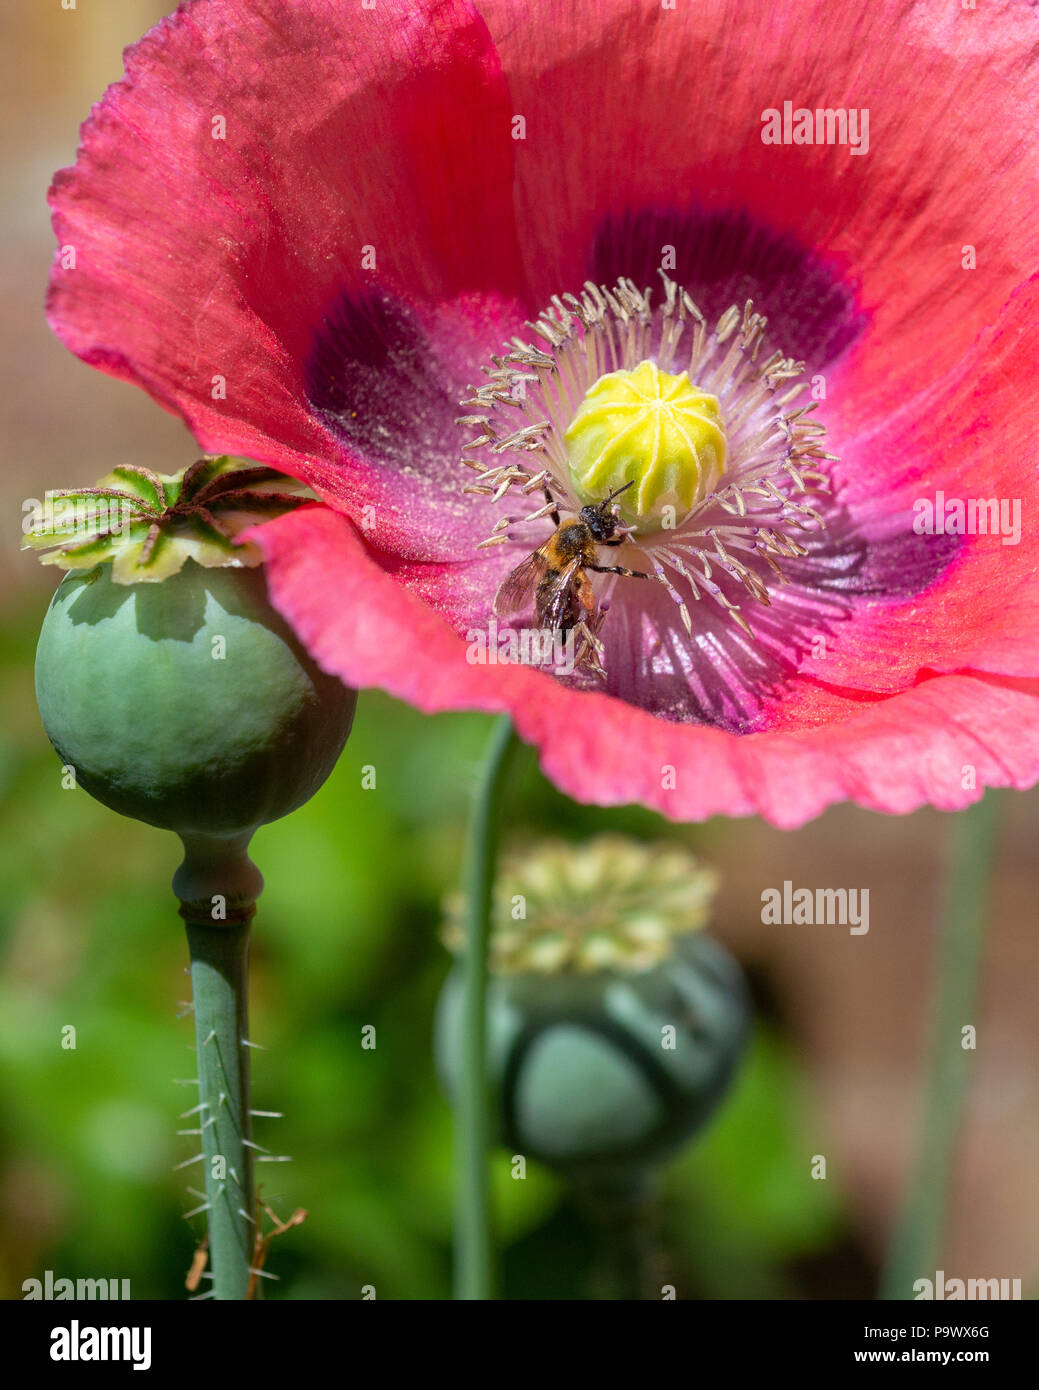 A small bee feeding on the nectar of a wild purple poppy flower (papaver somniferum) with seed pods. Stock Photo